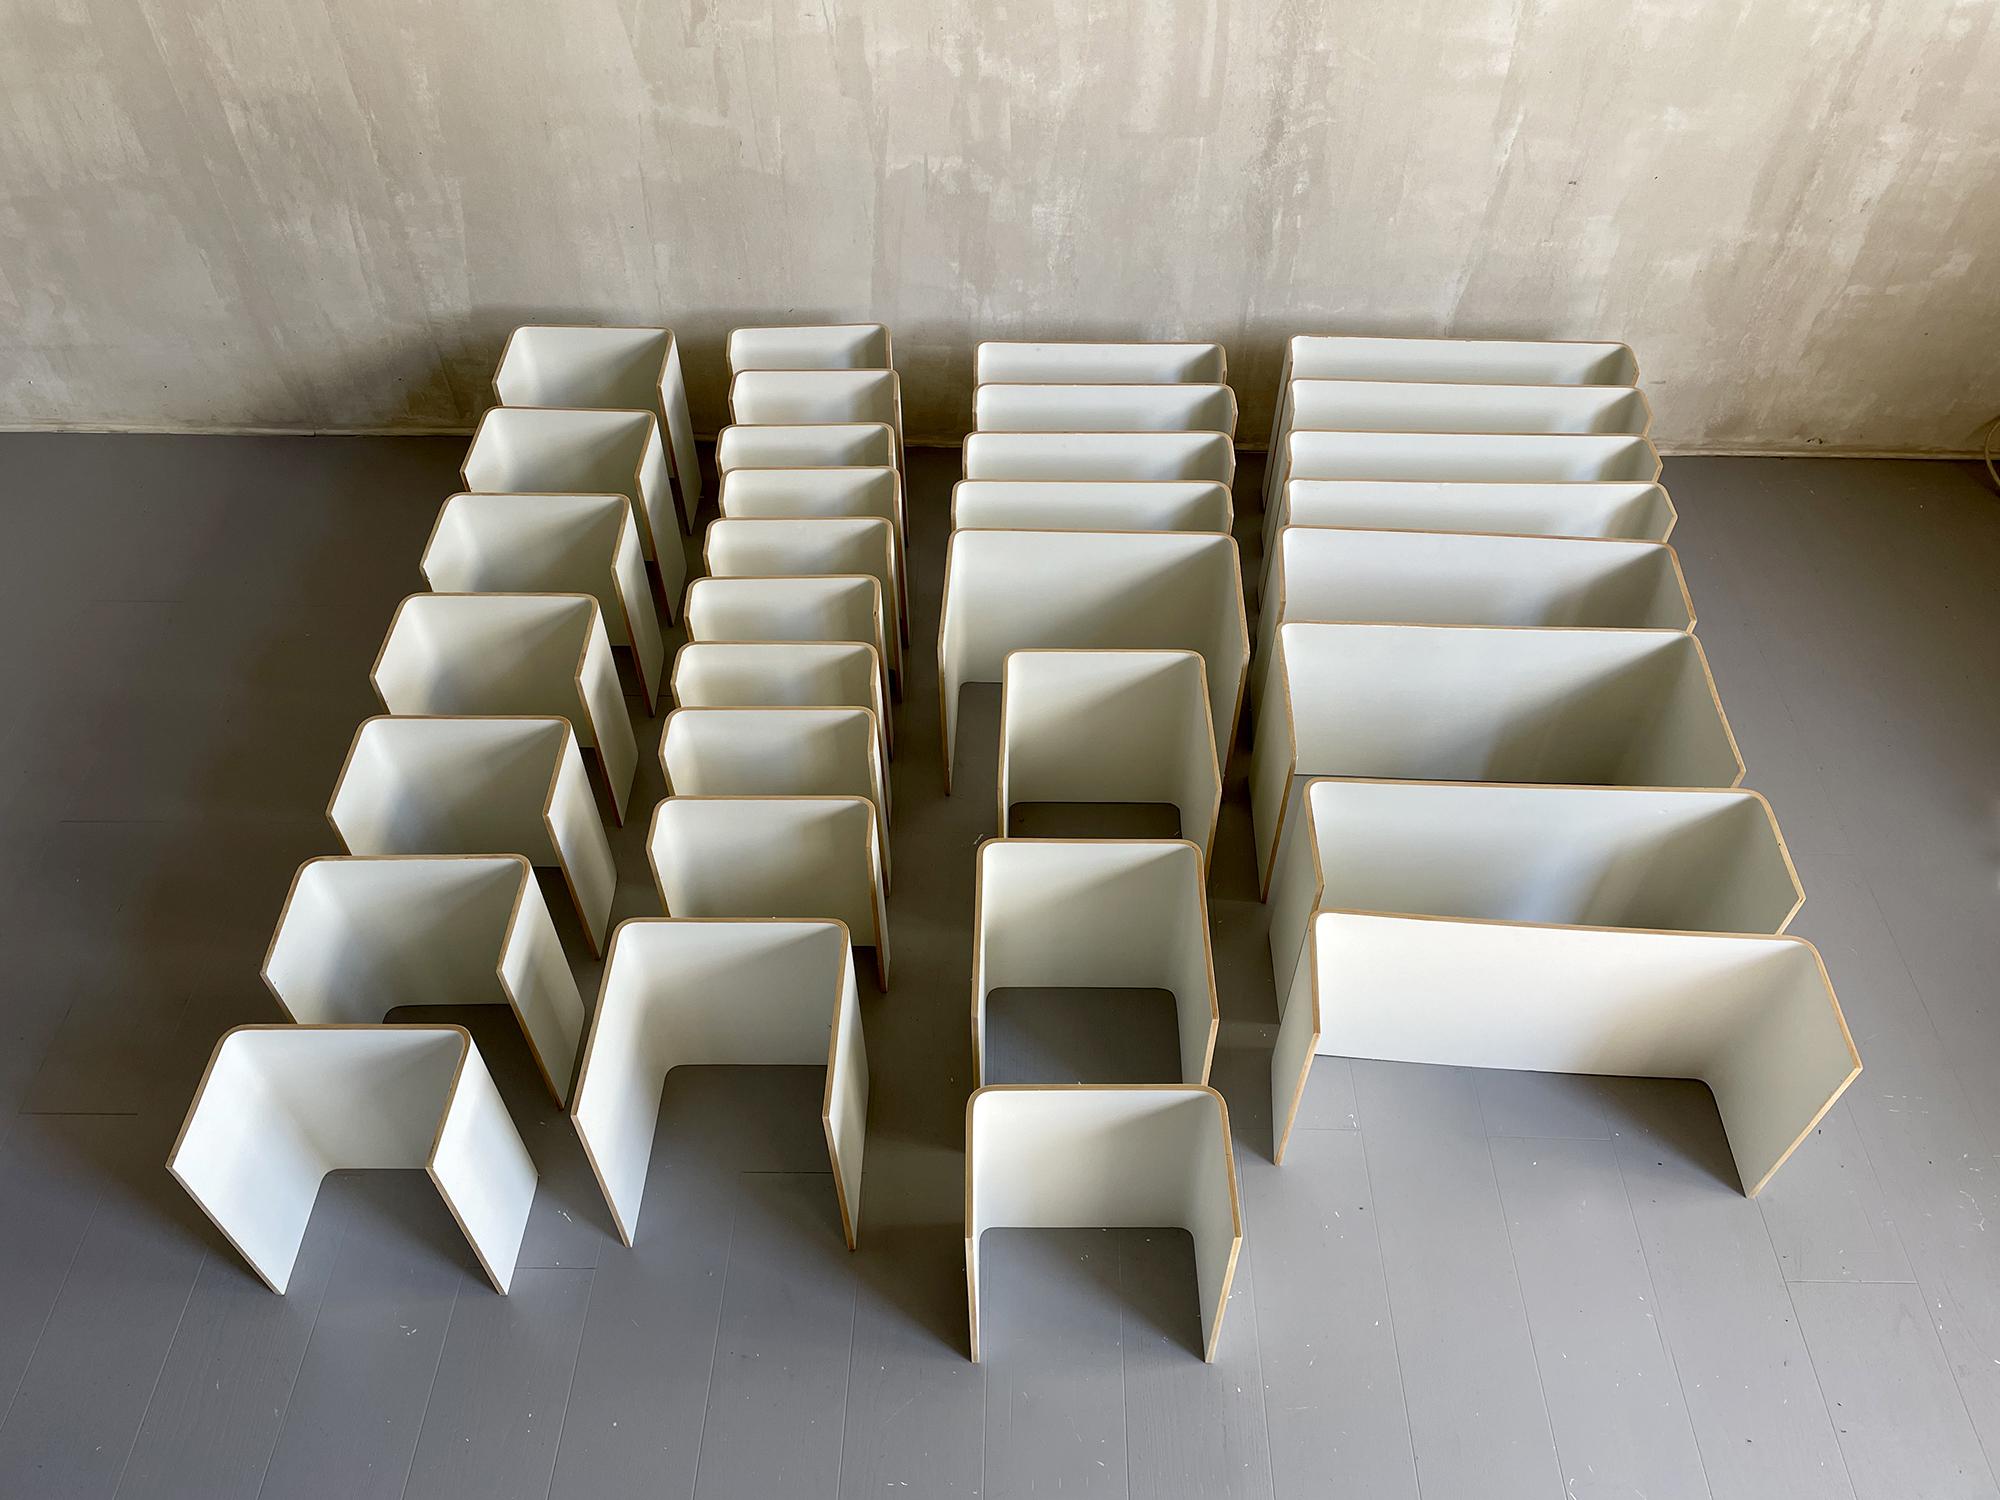 Bookcase in white lacquered curved plywood created by Jacques Dumond and produced by Les Ateliers Jacques Dumond in Lyon, France 1963.
Structured around two elements assembled by an aluminum stirrup, this bookcase is fully modular. This library